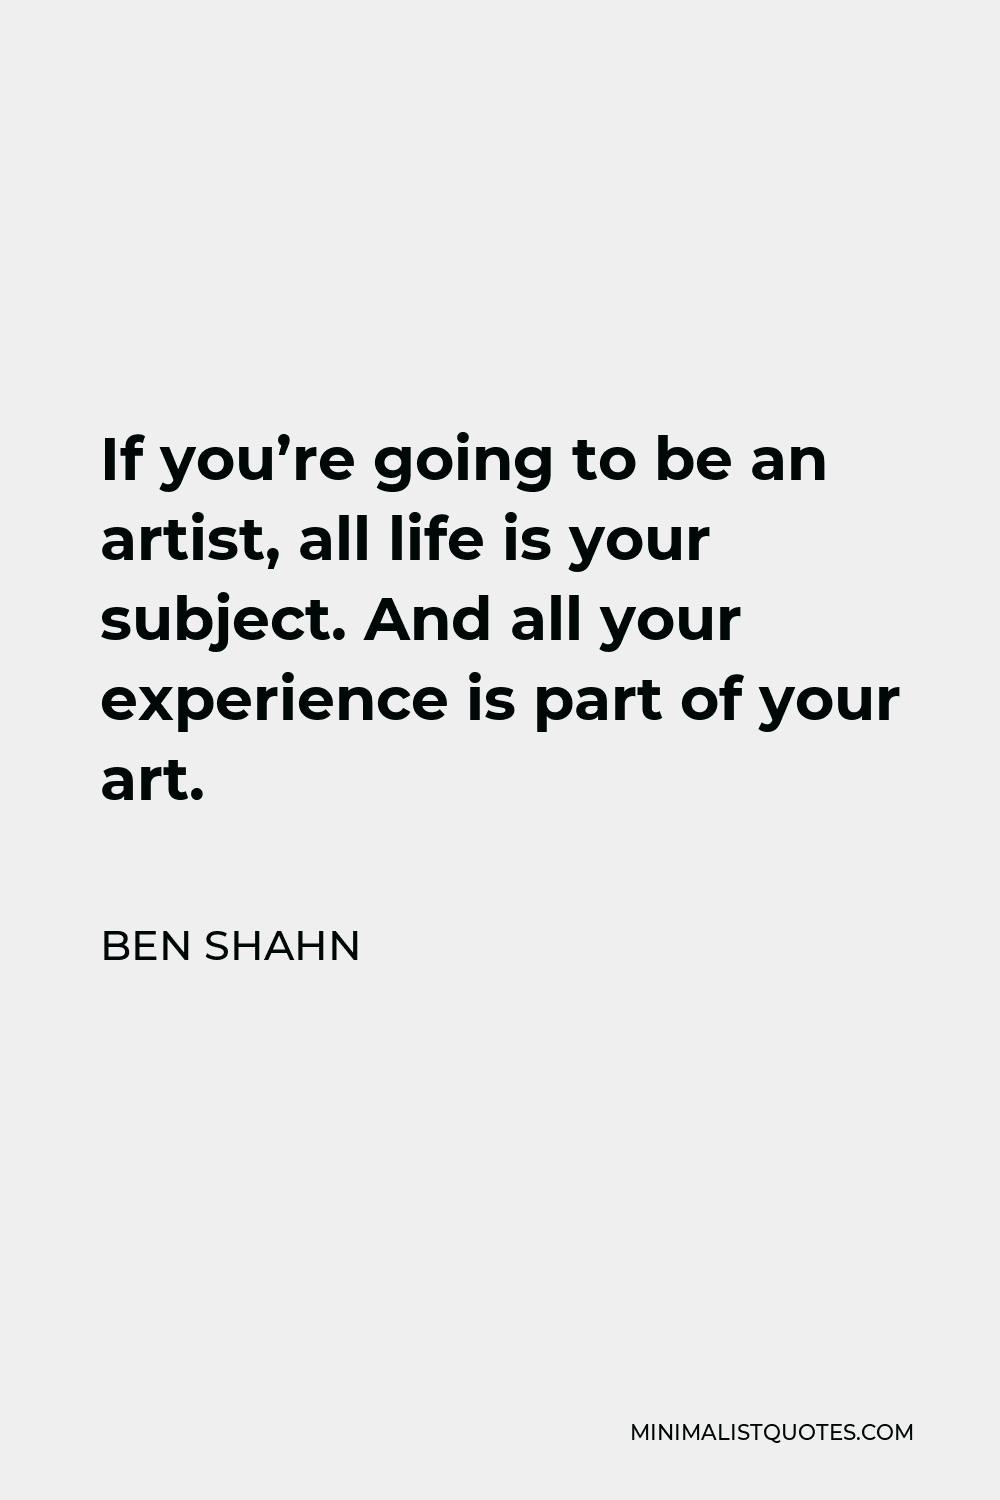 Ben Shahn Quote - If you’re going to be an artist, all life is your subject. And all your experience is part of your art.